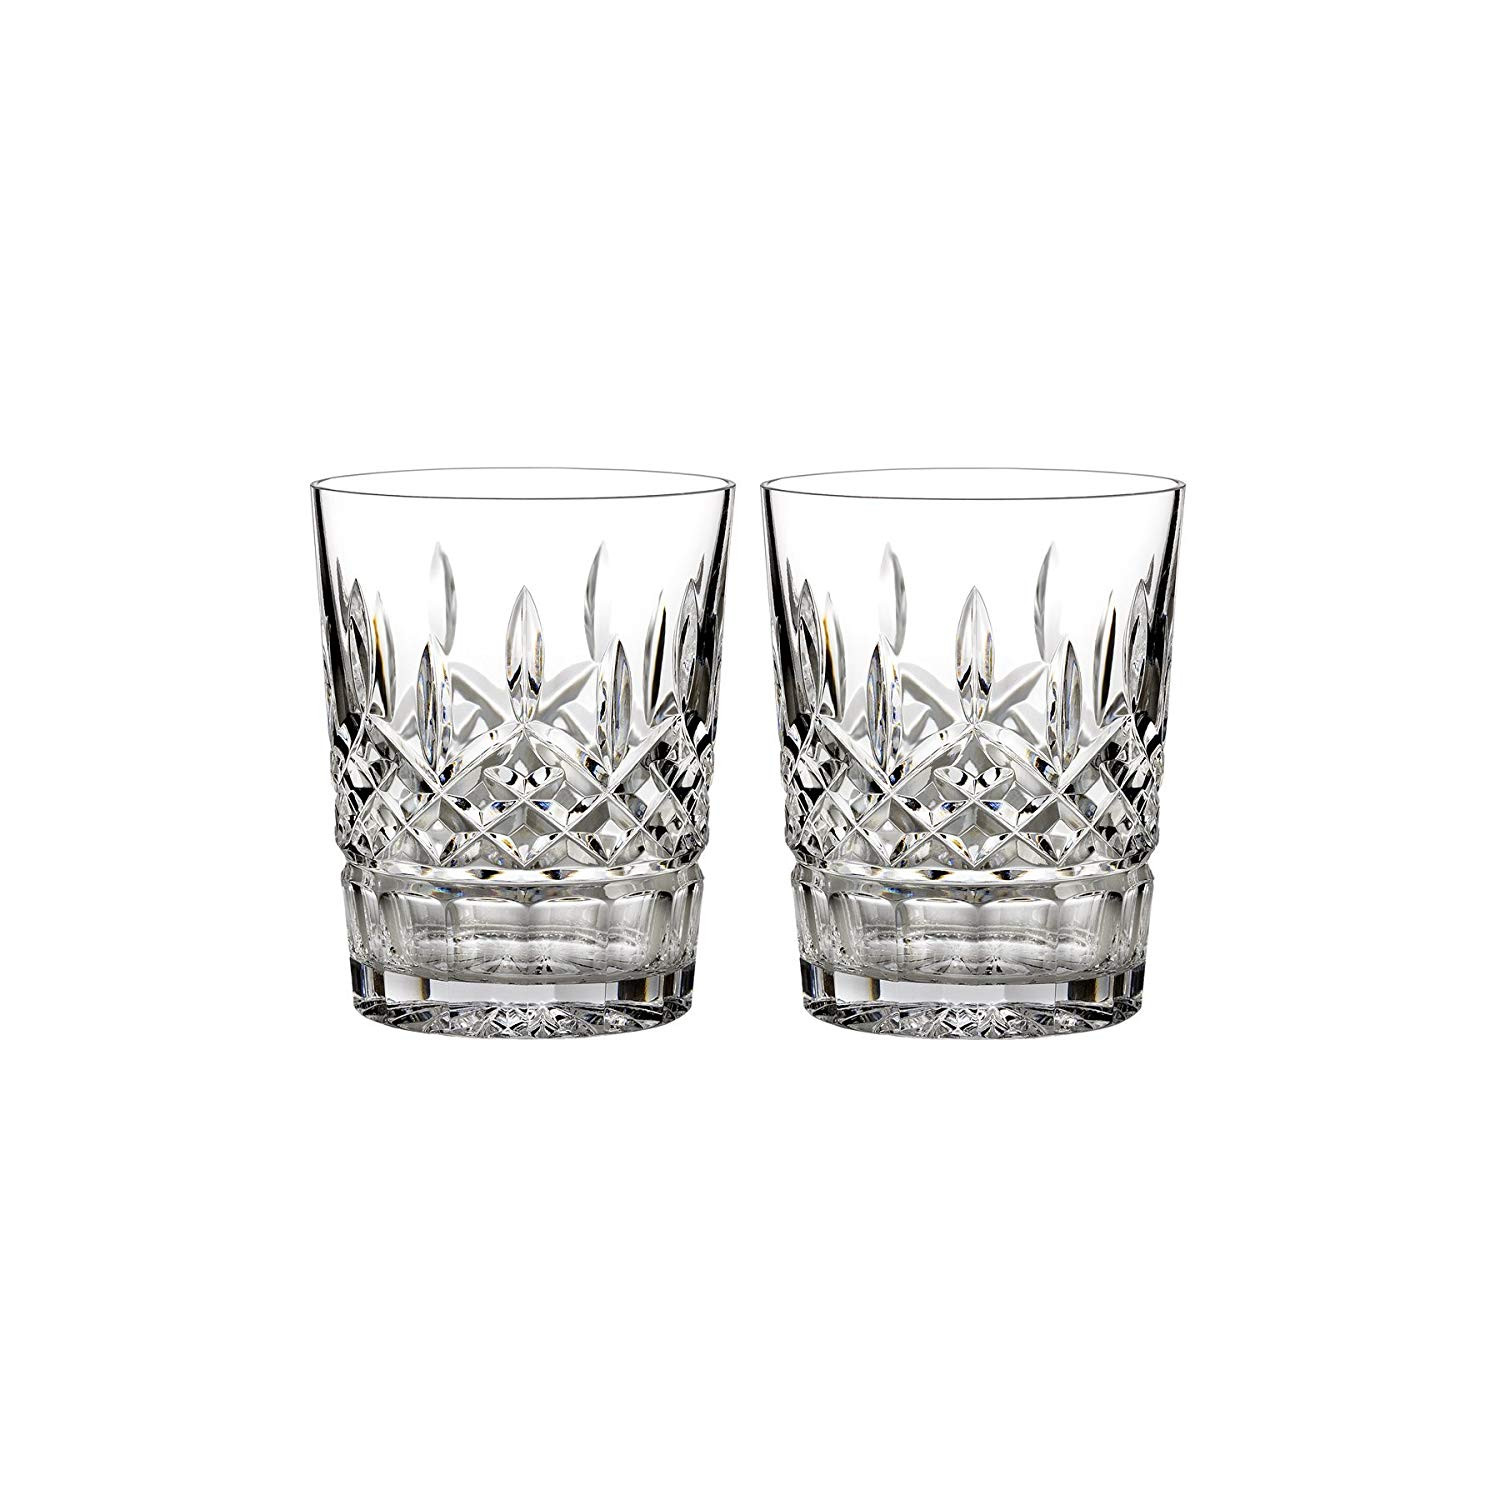 waterford eastbridge 8 vase of amazon com waterford lismore 12 oz double old fashioned set of 2 in amazon com waterford lismore 12 oz double old fashioned set of 2 old fashioned glasses old fashioned glasses